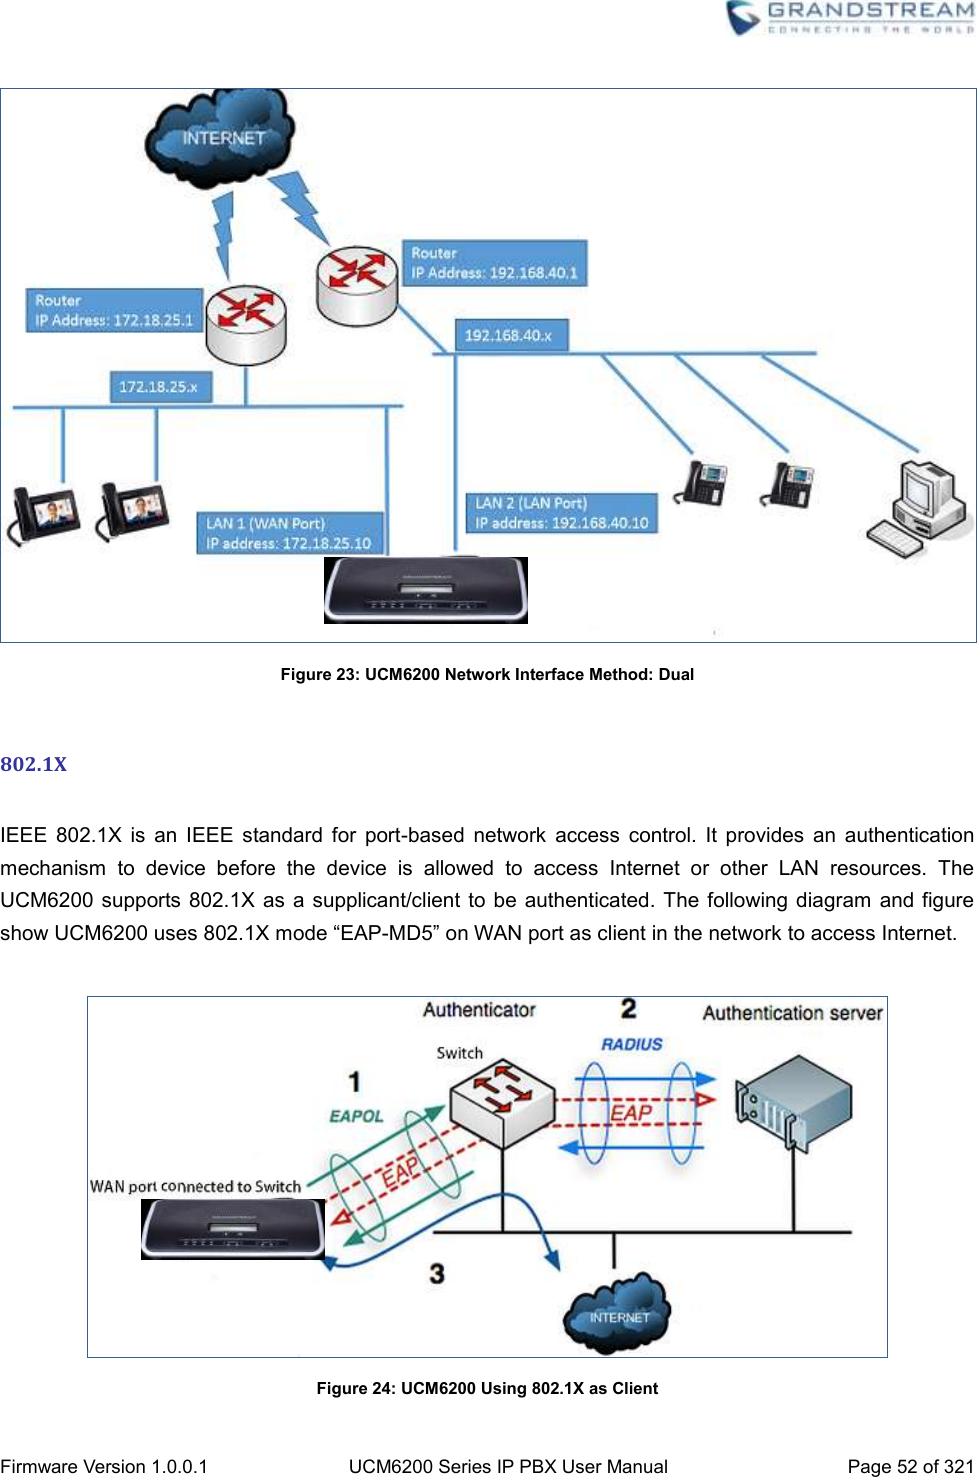  Firmware Version 1.0.0.1 UCM6200 Series IP PBX User Manual Page 52 of 321     Figure 23: UCM6200 Network Interface Method: Dual  802.1X  IEEE  802.1X  is  an  IEEE  standard  for  port-based  network  access  control.  It  provides  an  authentication mechanism  to  device  before  the  device  is  allowed  to  access  Internet  or  other  LAN  resources.  The UCM6200 supports 802.1X as  a supplicant/client to be authenticated. The following diagram  and figure show UCM6200 uses 802.1X mode “EAP-MD5” on WAN port as client in the network to access Internet.   Figure 24: UCM6200 Using 802.1X as Client 